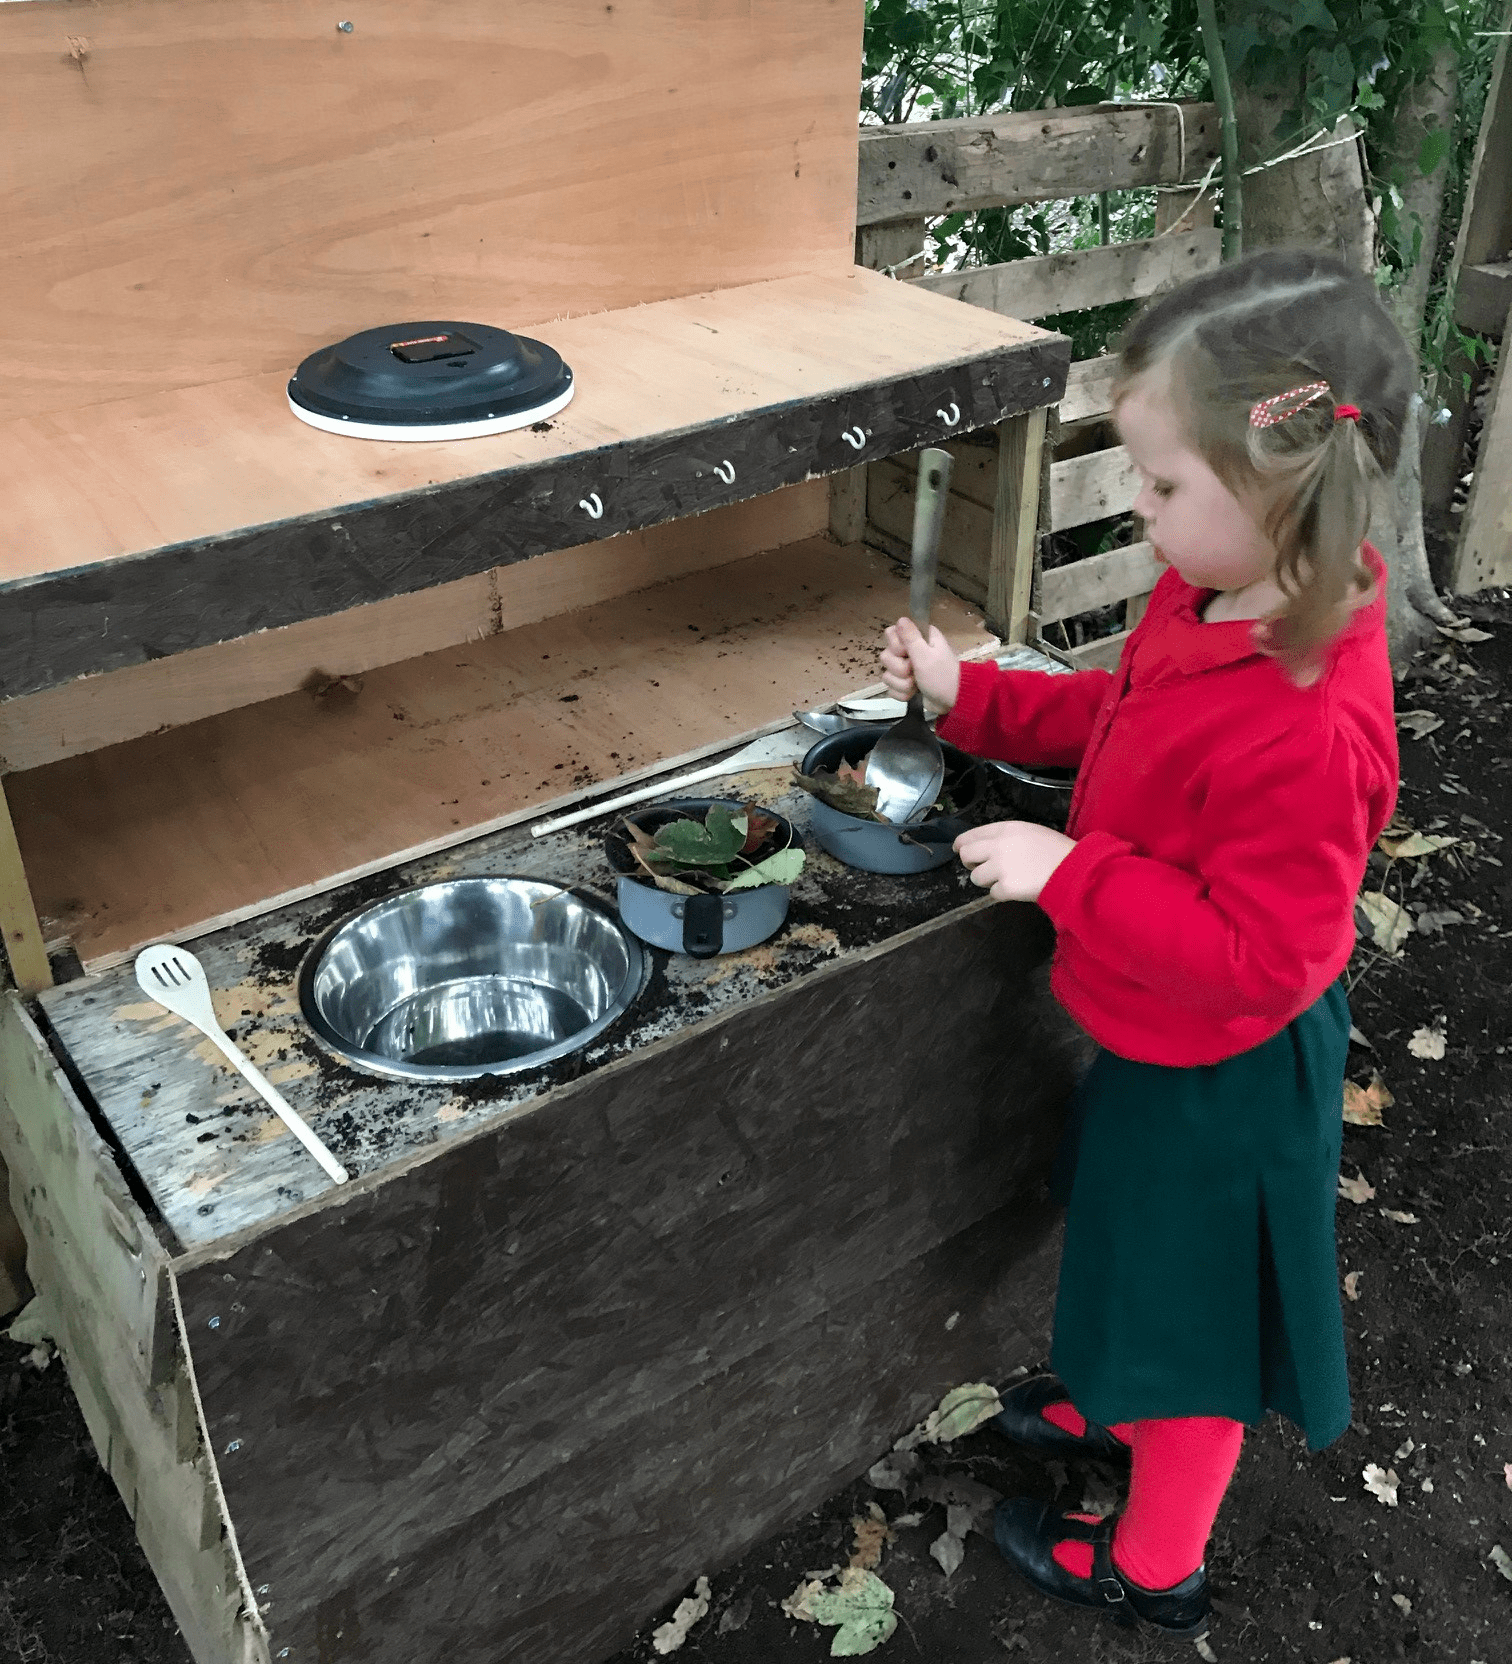 A photo taken in the mud kitchen showing a child playing - one of the things to do in the Nature Play Area.